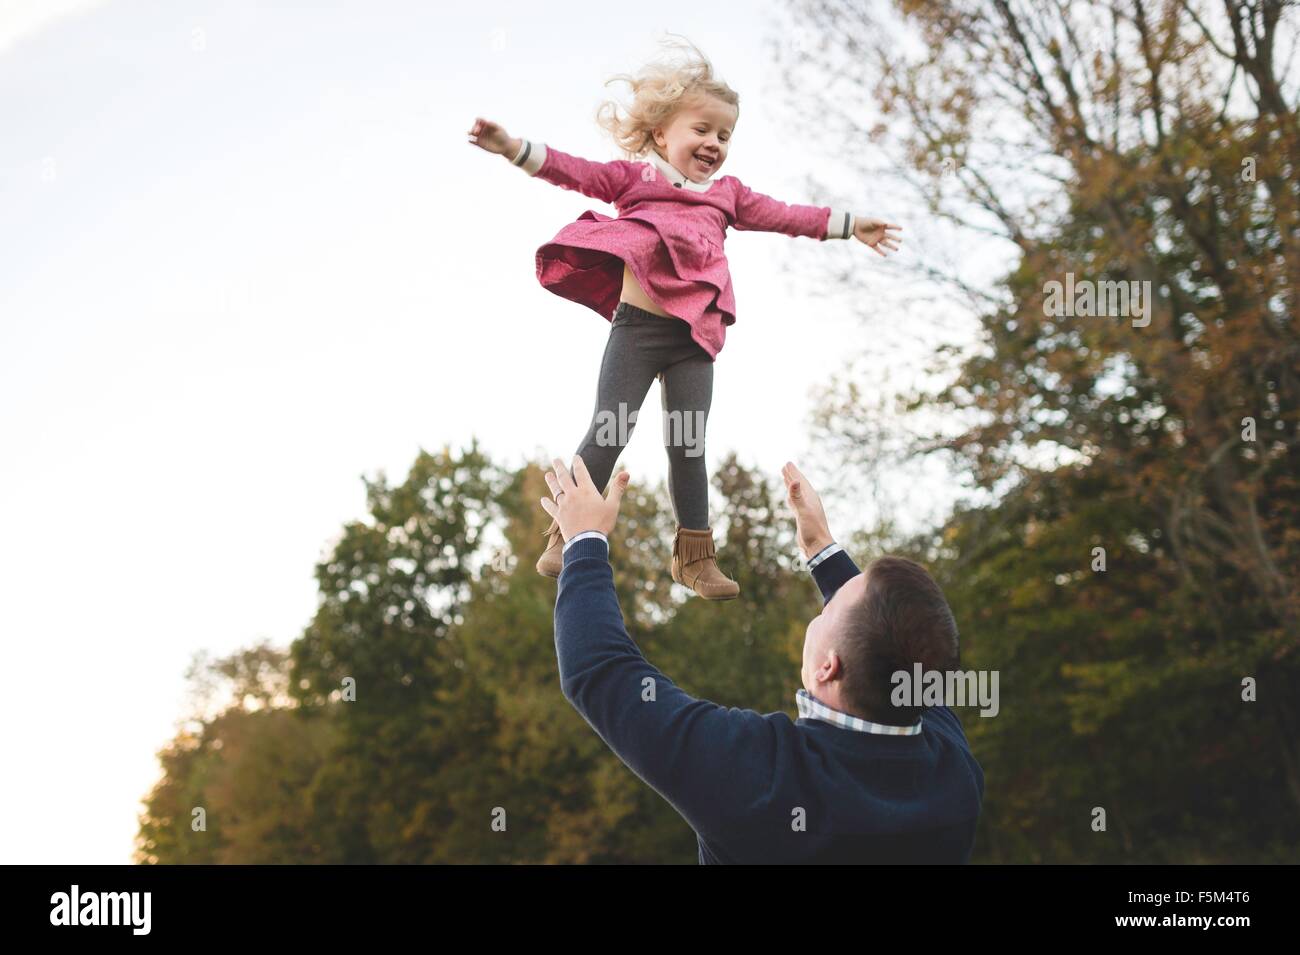 Mid adult man throwing young daughter mid air Stock Photo